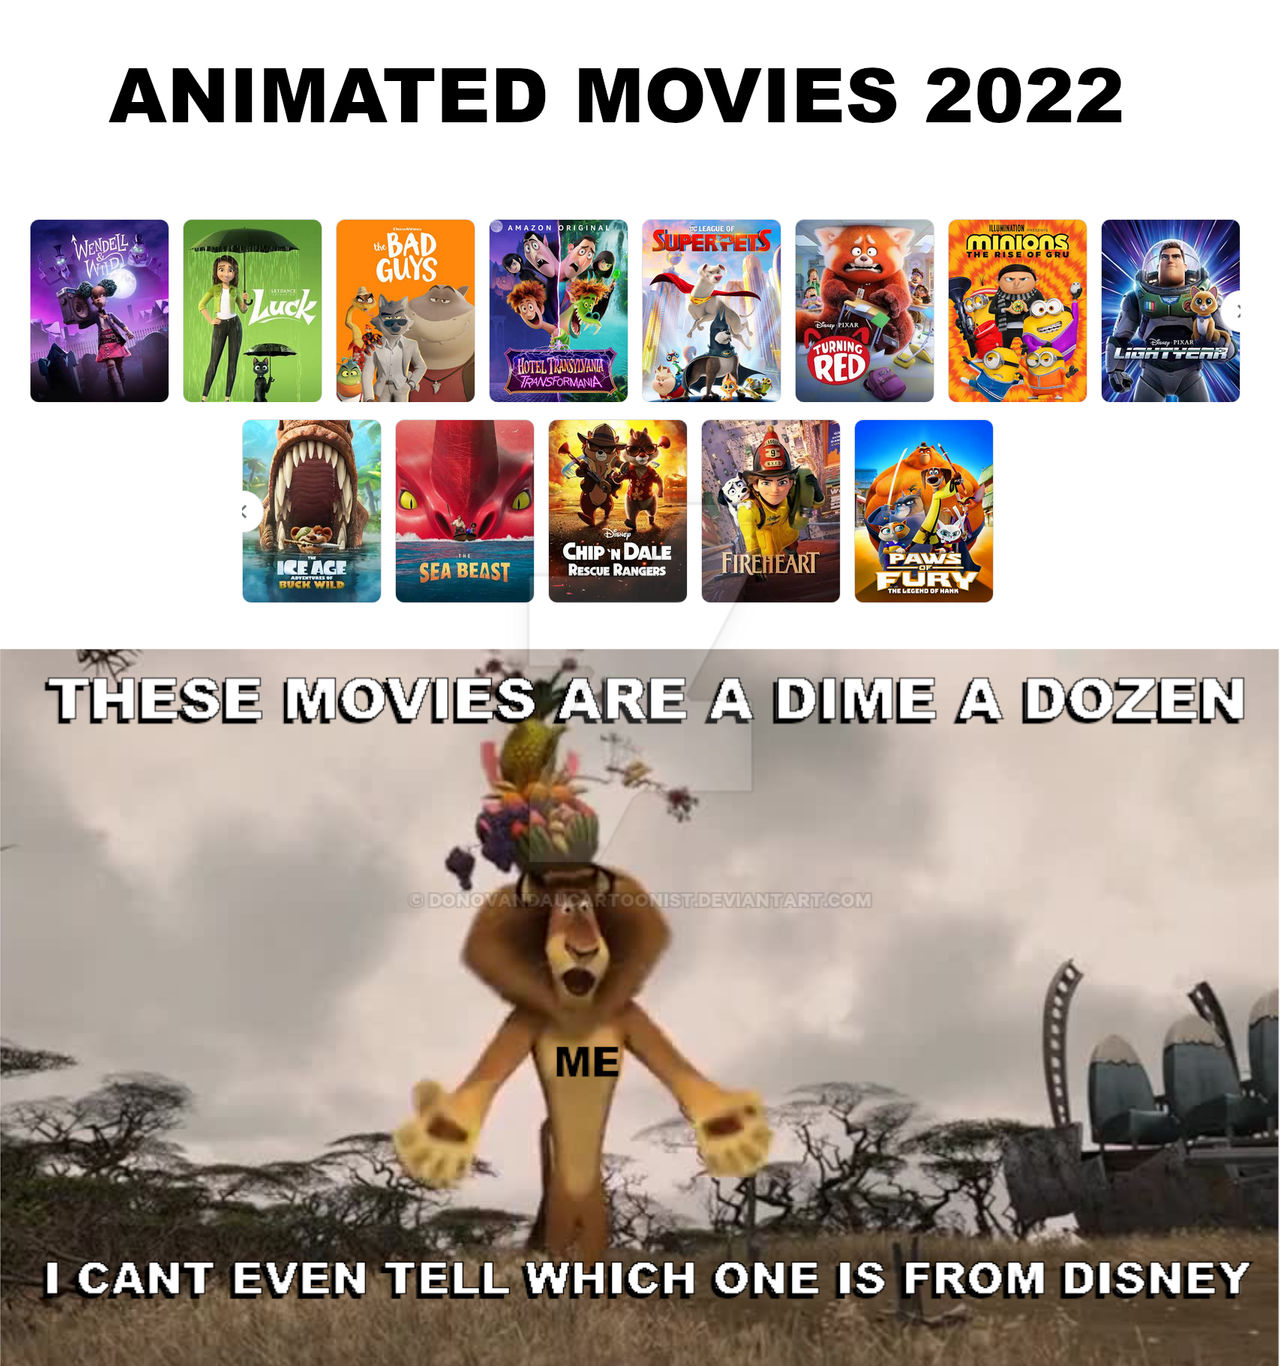 My thoughts on Animated Movies 2022 by DonovanDauCartoonist on DeviantArt